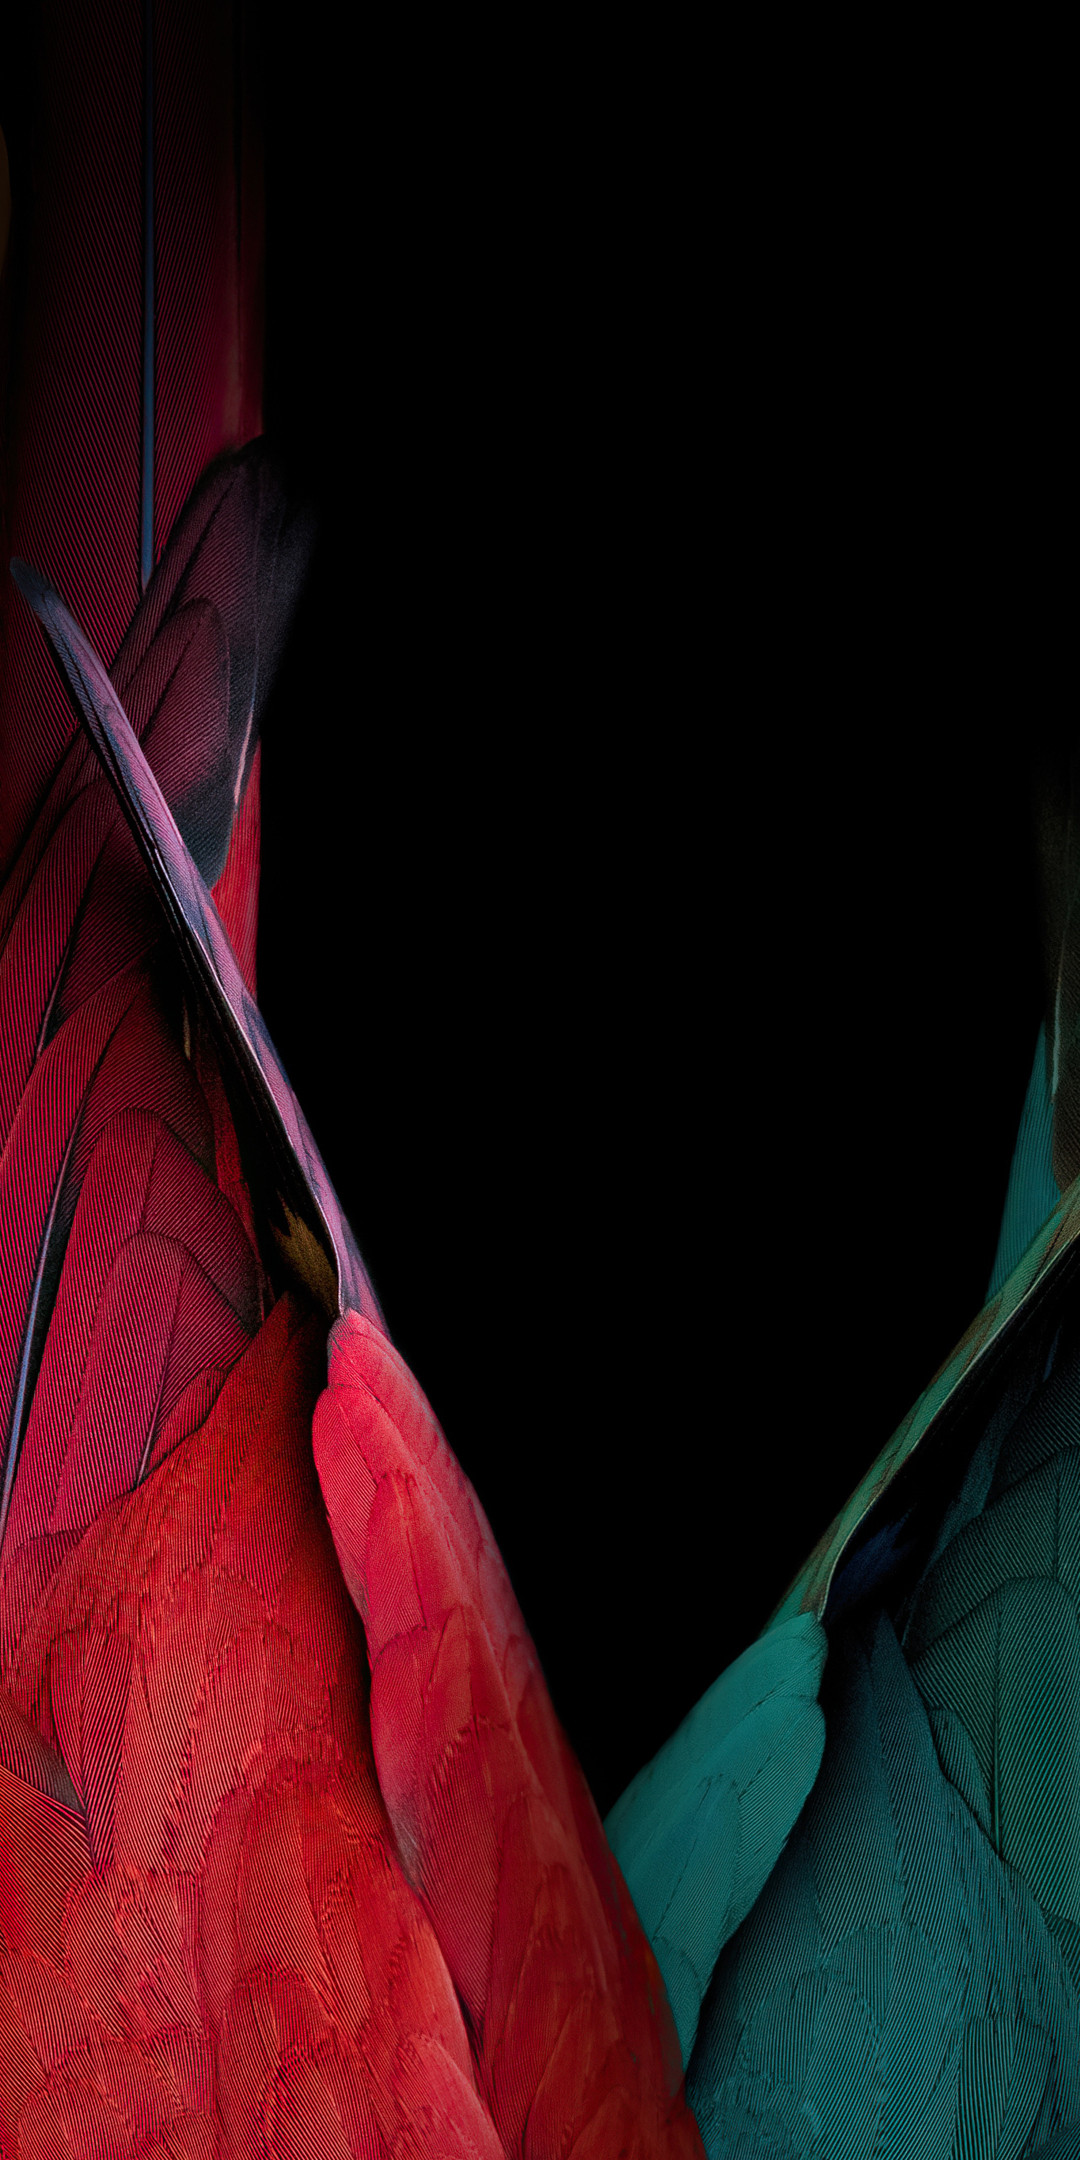 Birds tails, red and green birds, oled, 1080x2160 wallpaper